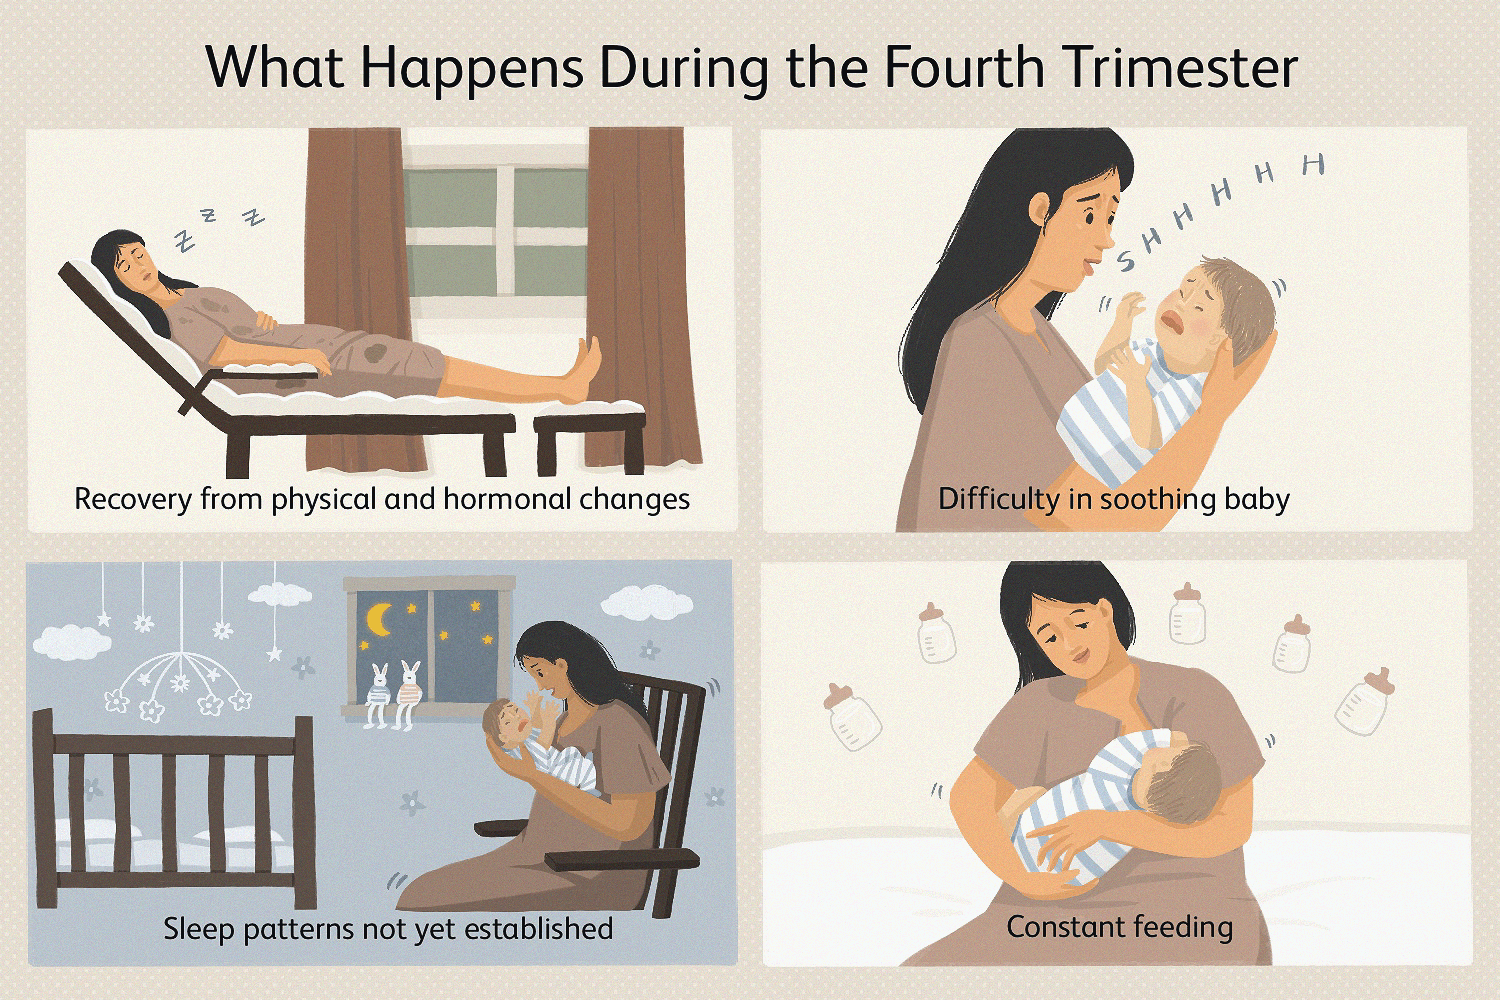 The Fourth Trimester: A Postpartum Guide to Healing Your Body, Balancing  Your Emotions, and Restoring Your Vitality